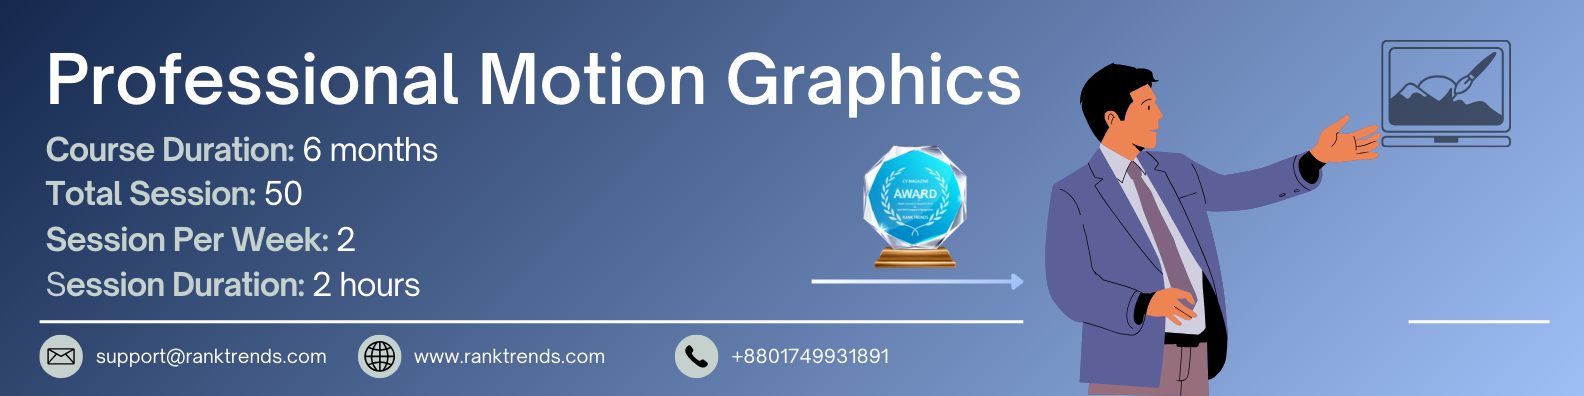 rank-trends-professional-motion-graphics-course